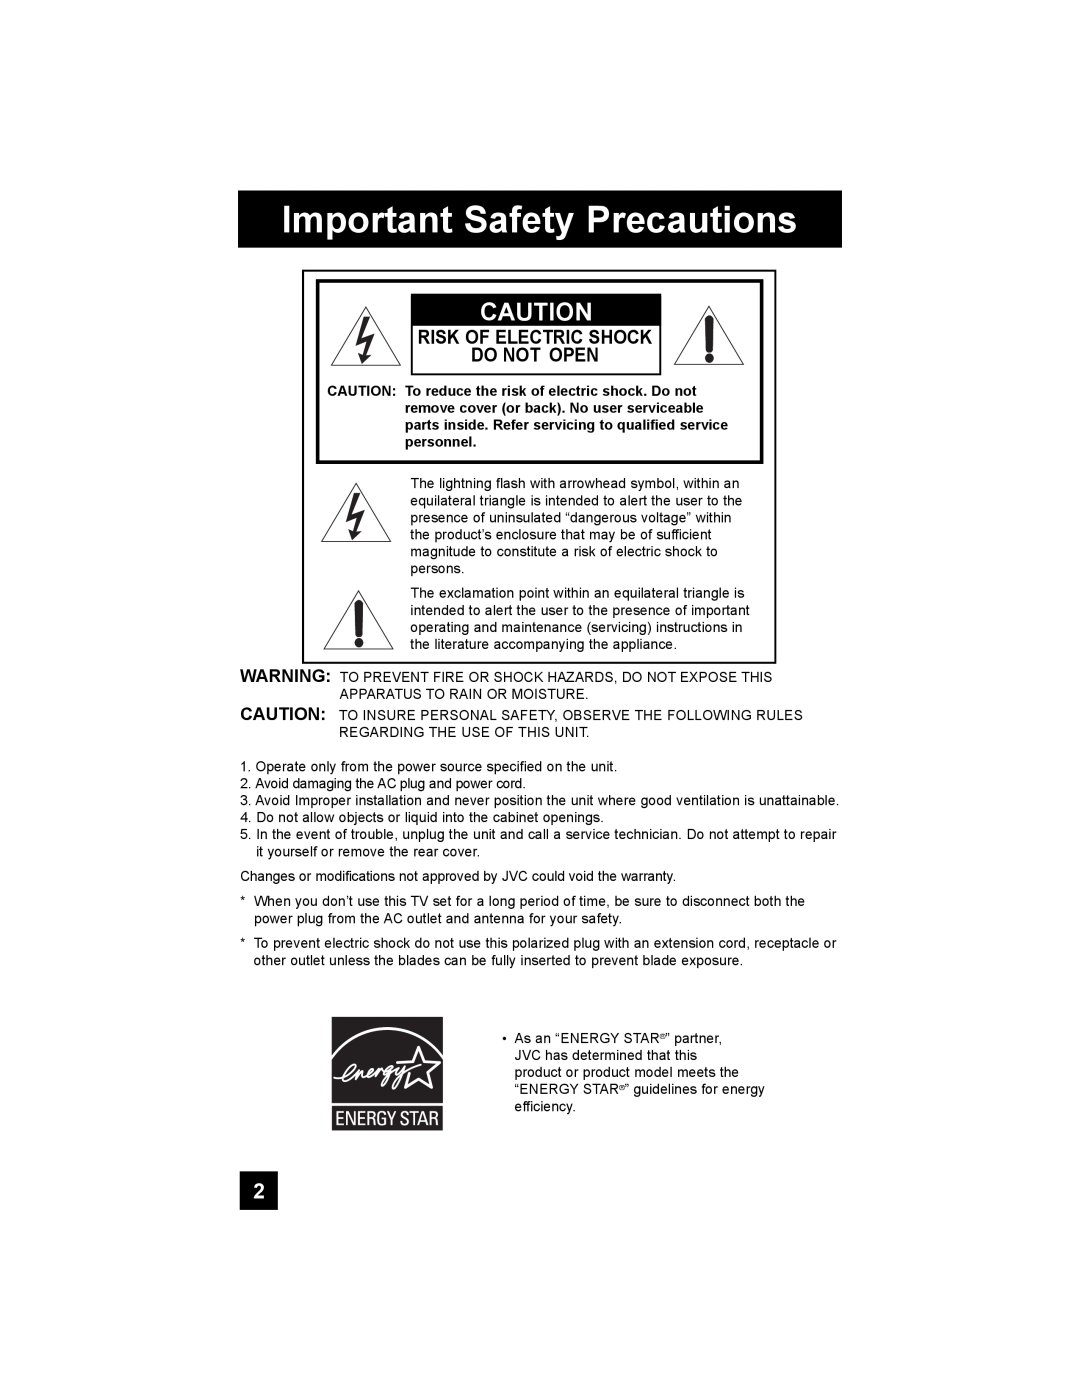 JVC LT-42X898, LT-37X898 manual Important Safety Precautions, Risk Of Electric Shock Do Not Open 